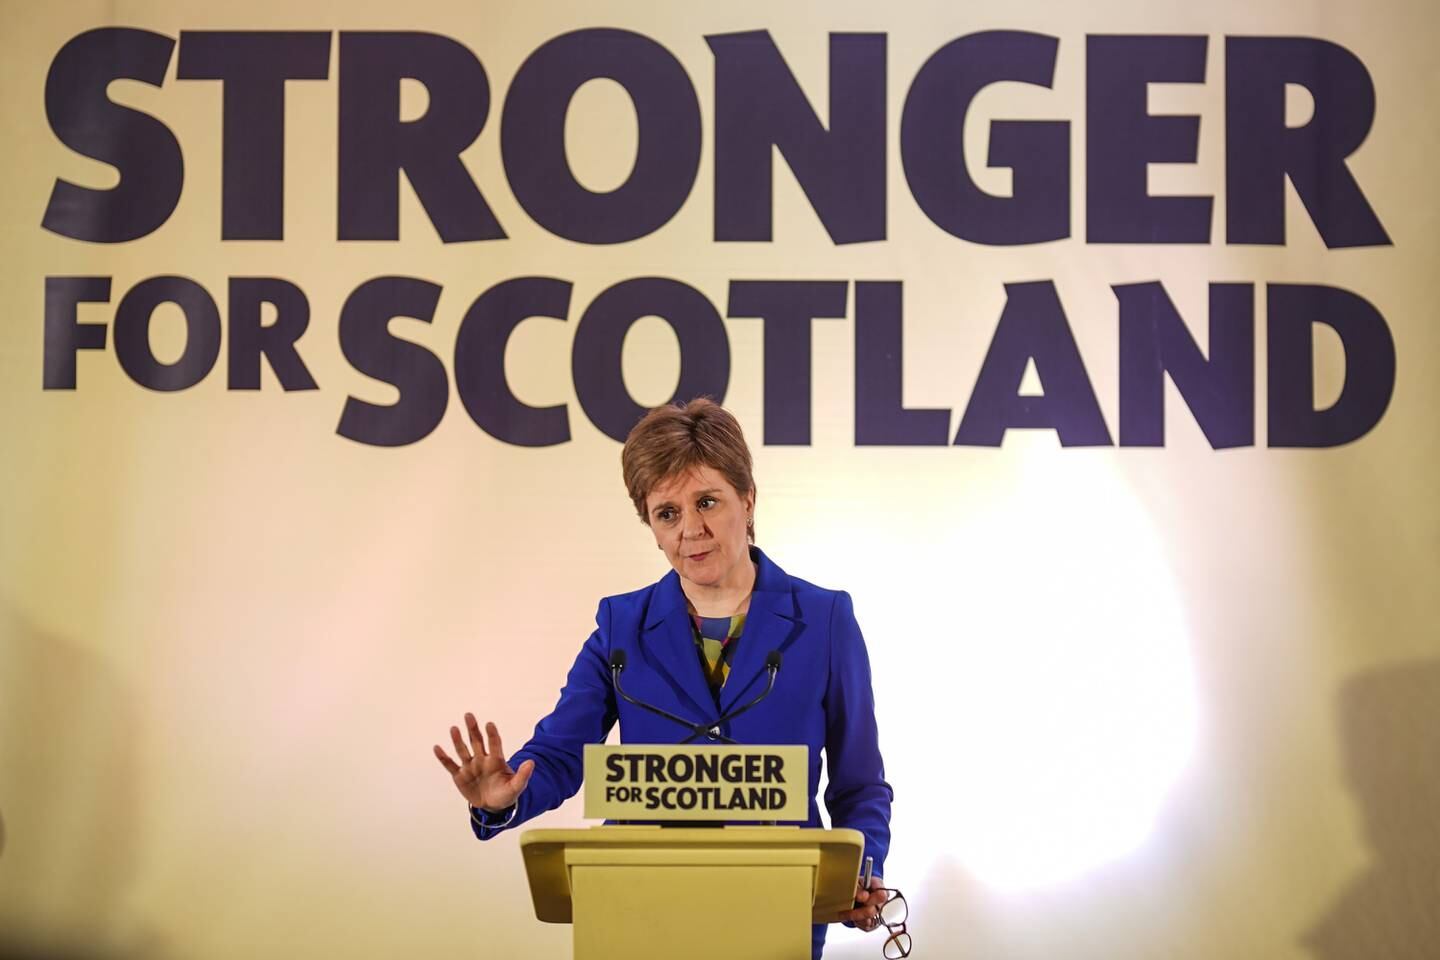 Scotland's First Minister, Nicola Sturgeon, during a news conference in Edinburgh on Wednesday. Getty Images